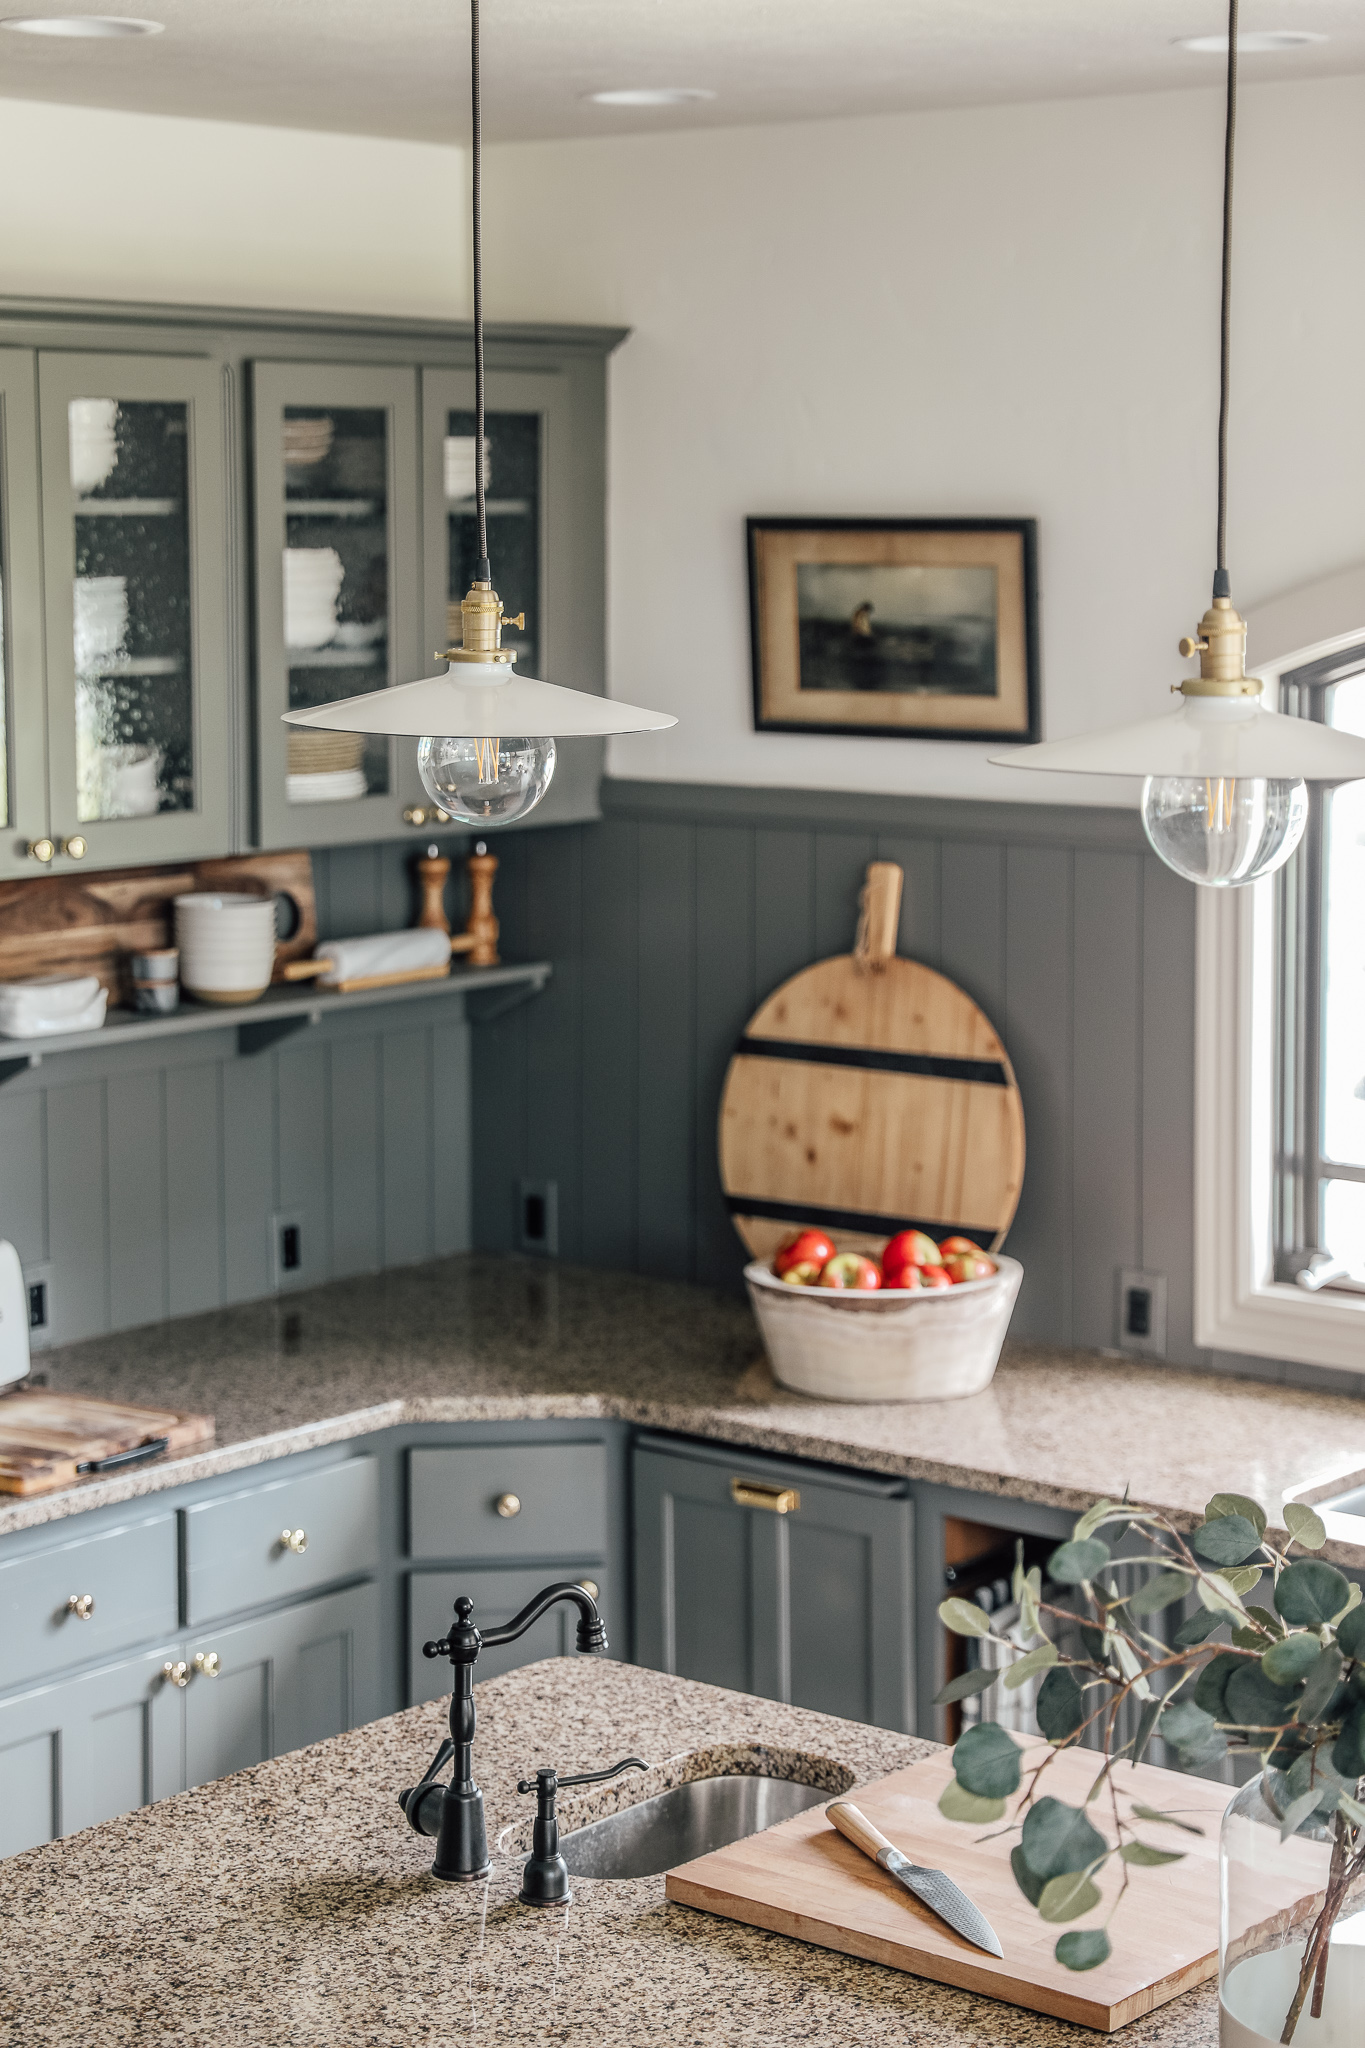 Our Modern Cottage Kitchen Makeover on the cheap   Chris Loves ...